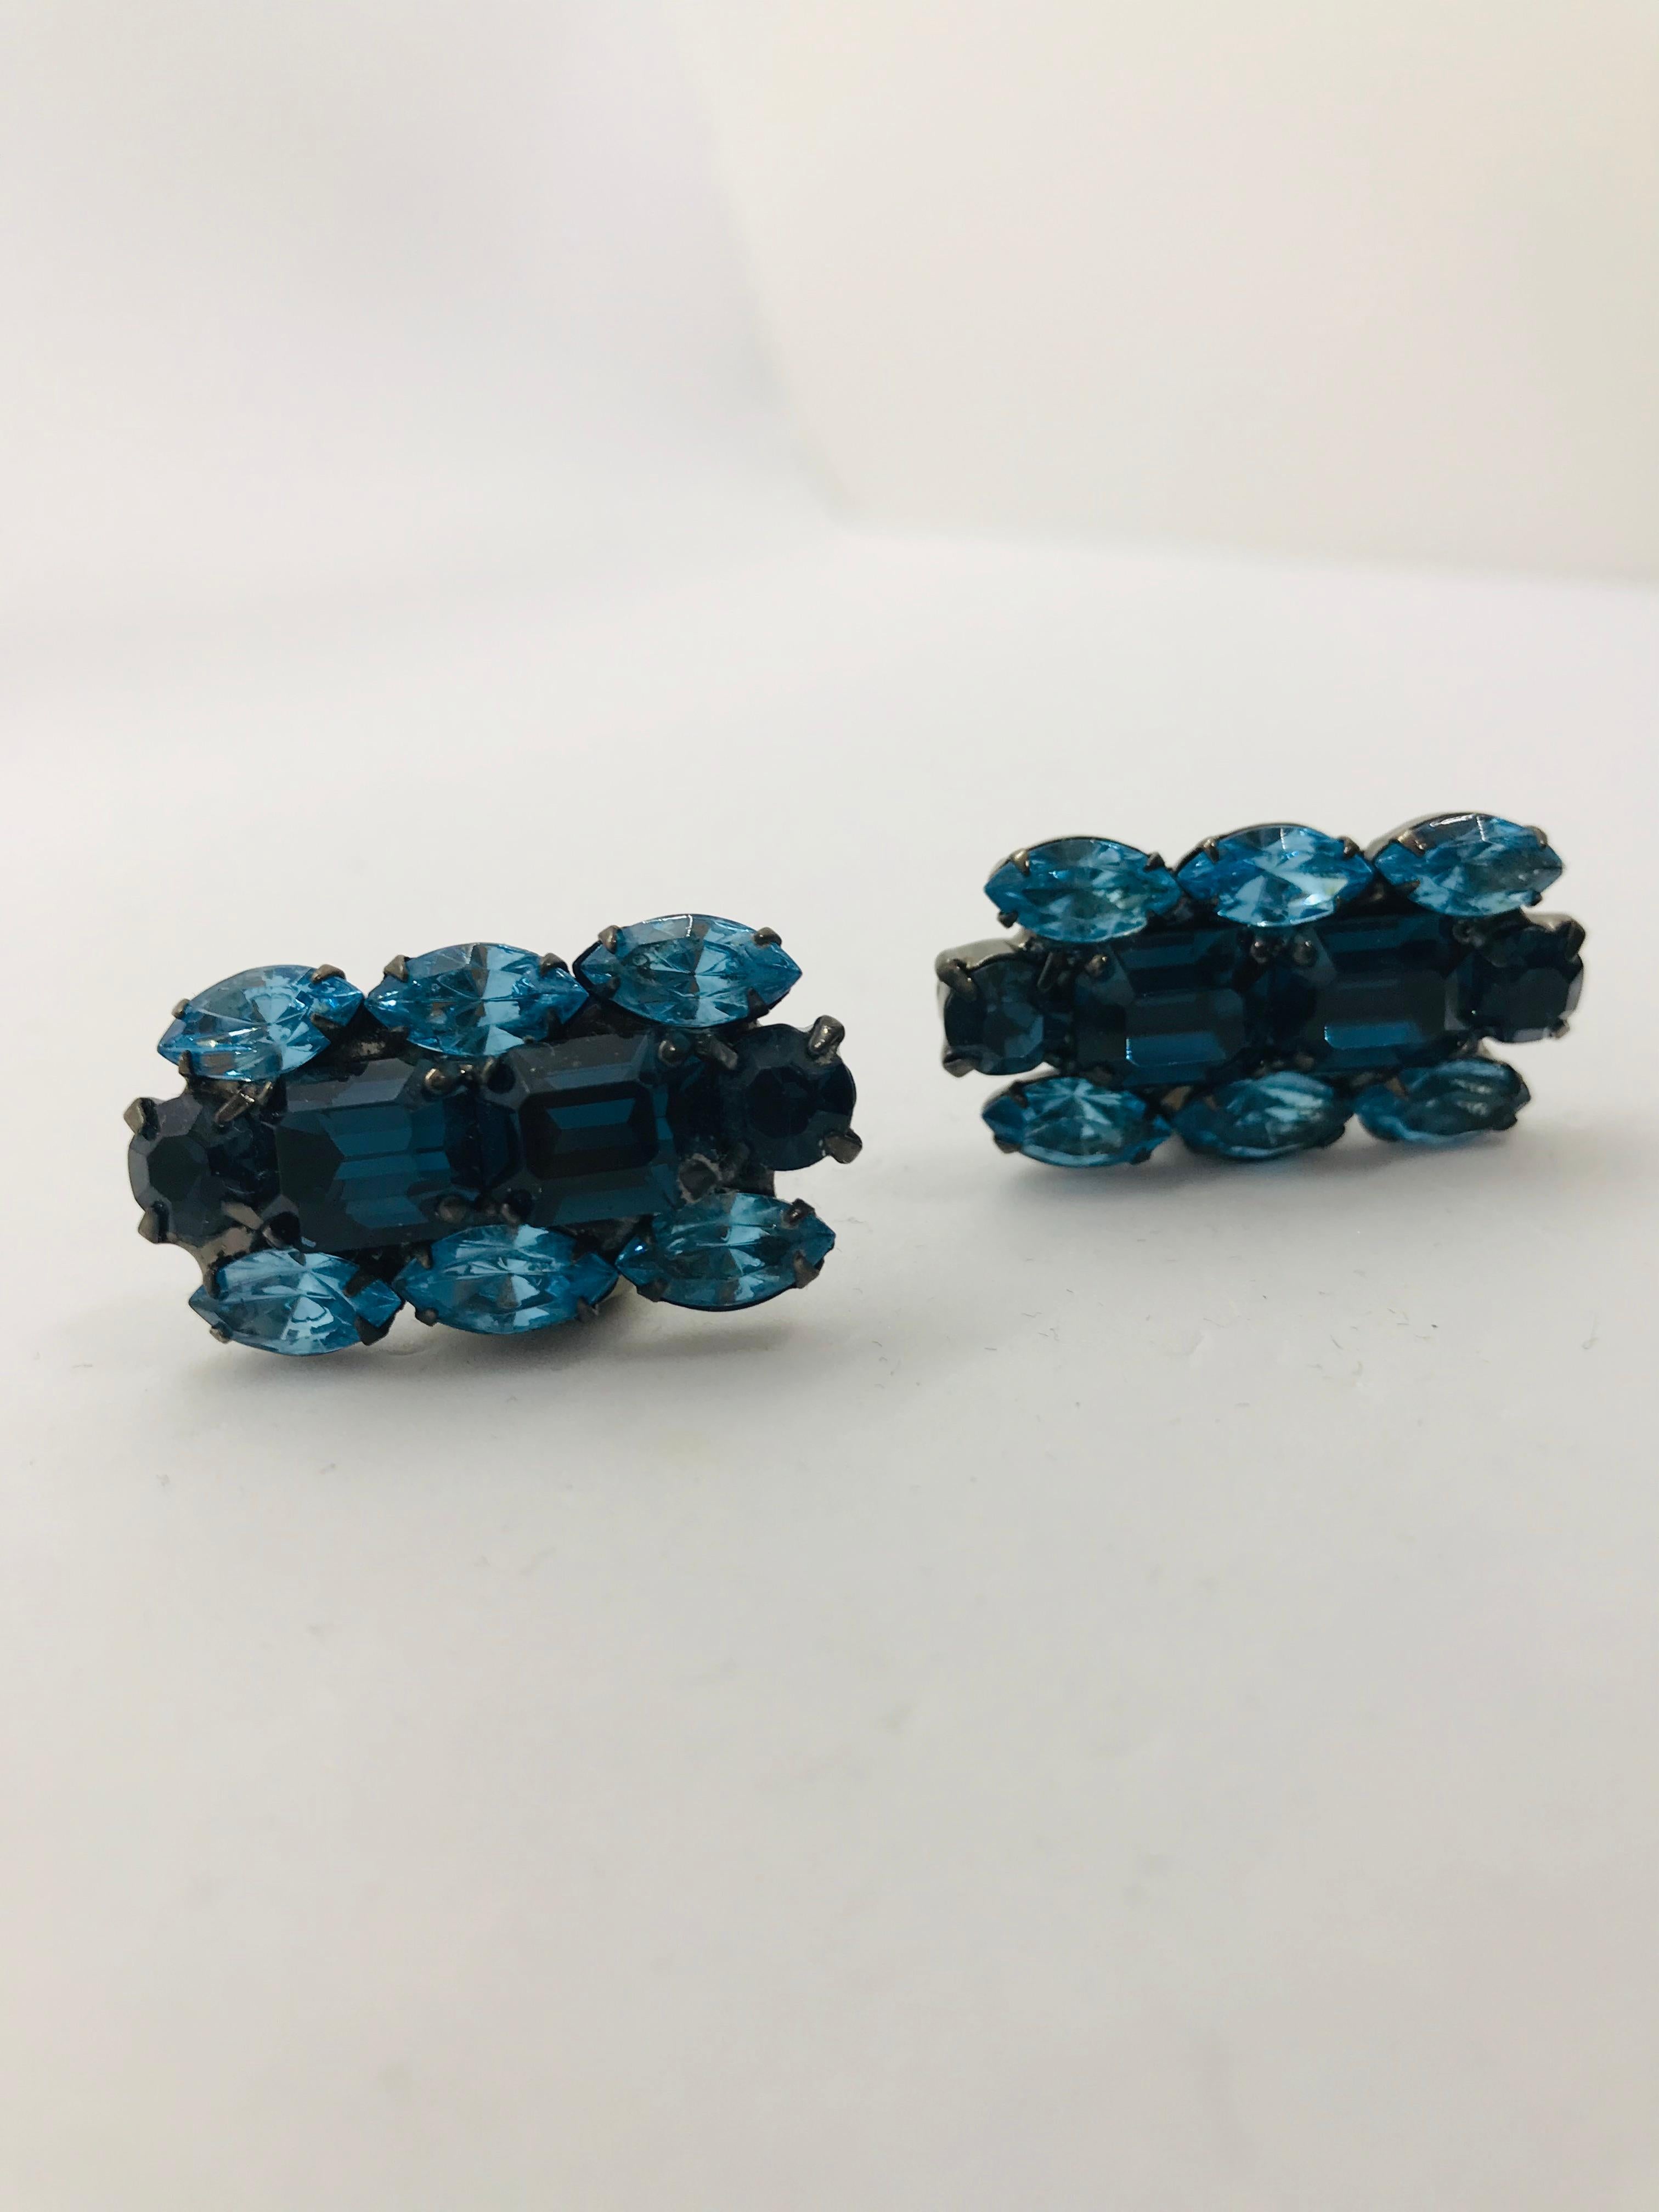 Add a touch of colour to any navy blue suit with our light sapphire and Montana blue sapphire Austrian crystal cuff links! these cufflinks look great at the office or wear them with a french cuff shirt and blue jeans.  Featuring 1960s vintage